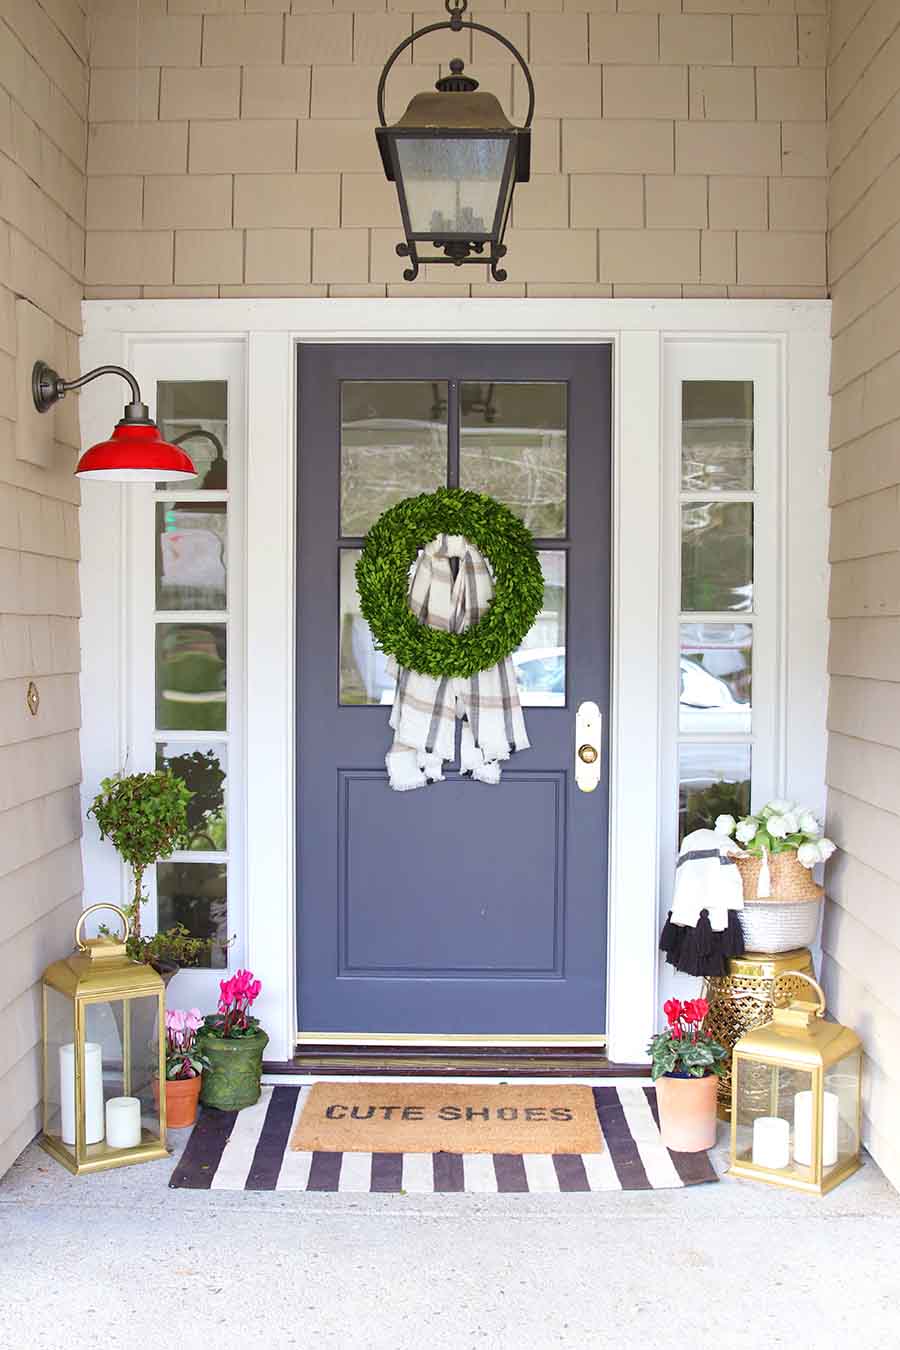 Layered Doormats for Summer - How to Mix and Match - Making Joy and Pretty  Things